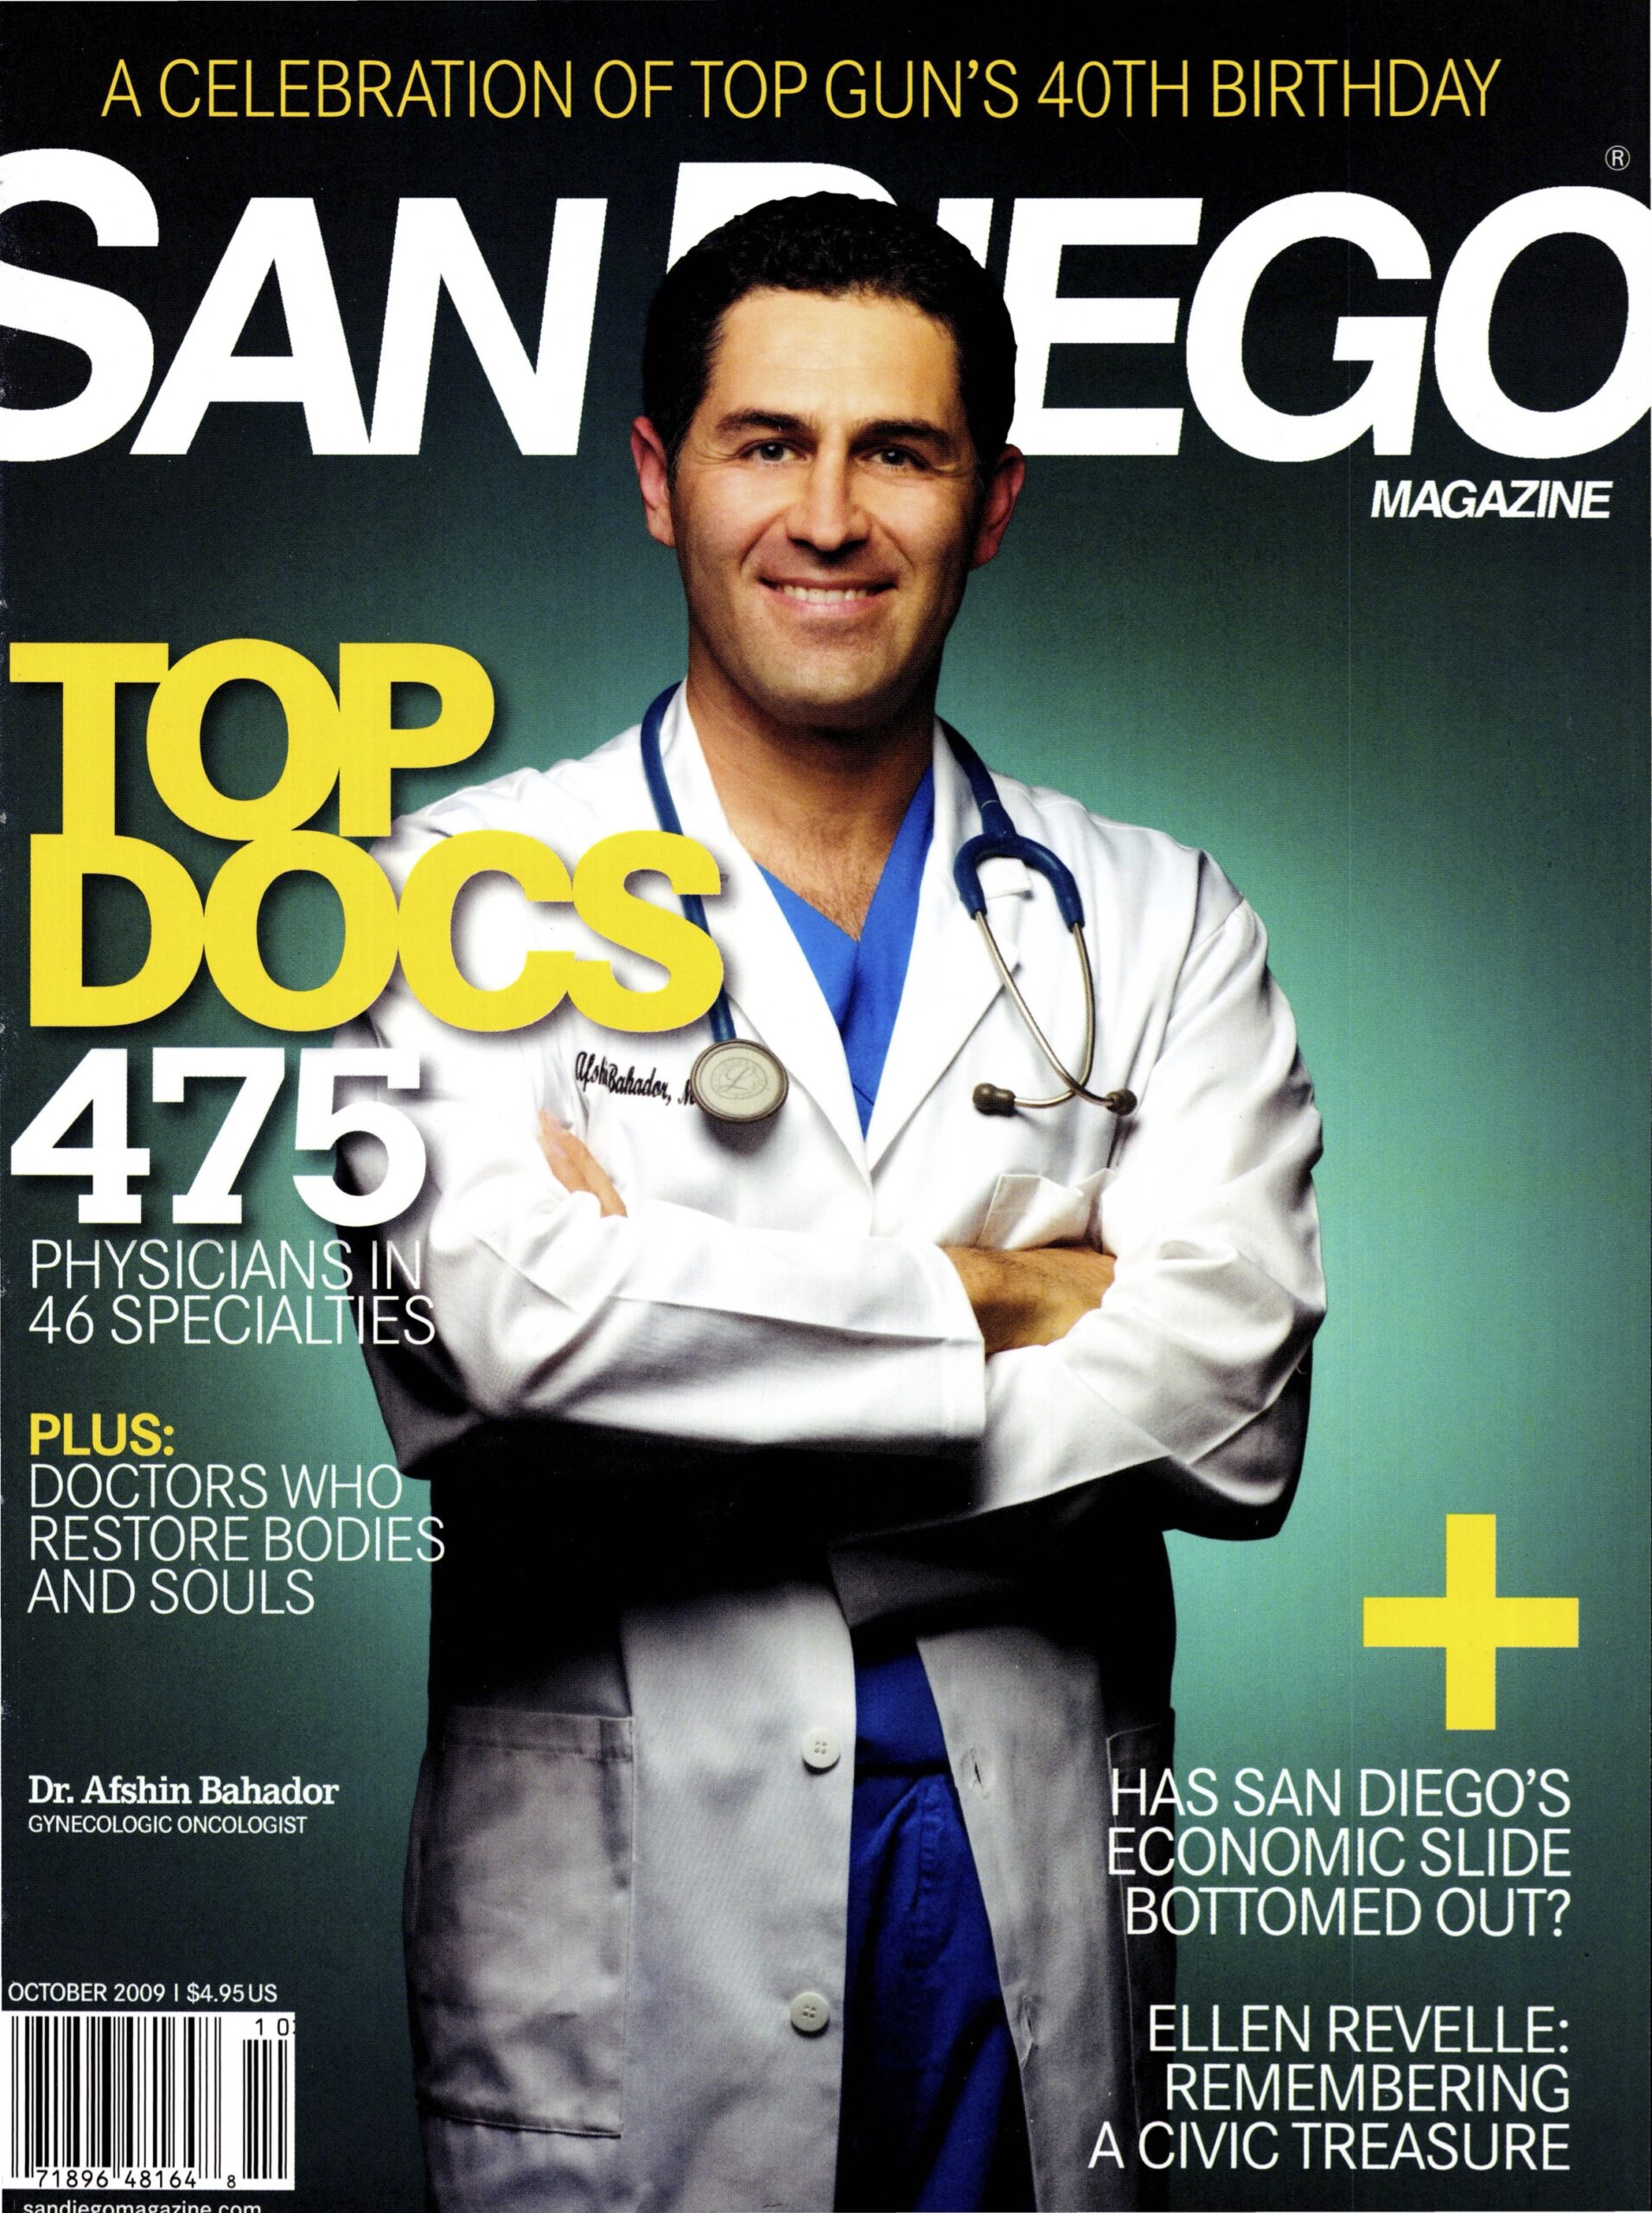 Covering 75 San Diego Magazine Best Doctors Cover from October 2009 featuring a doctor with a stethoscope